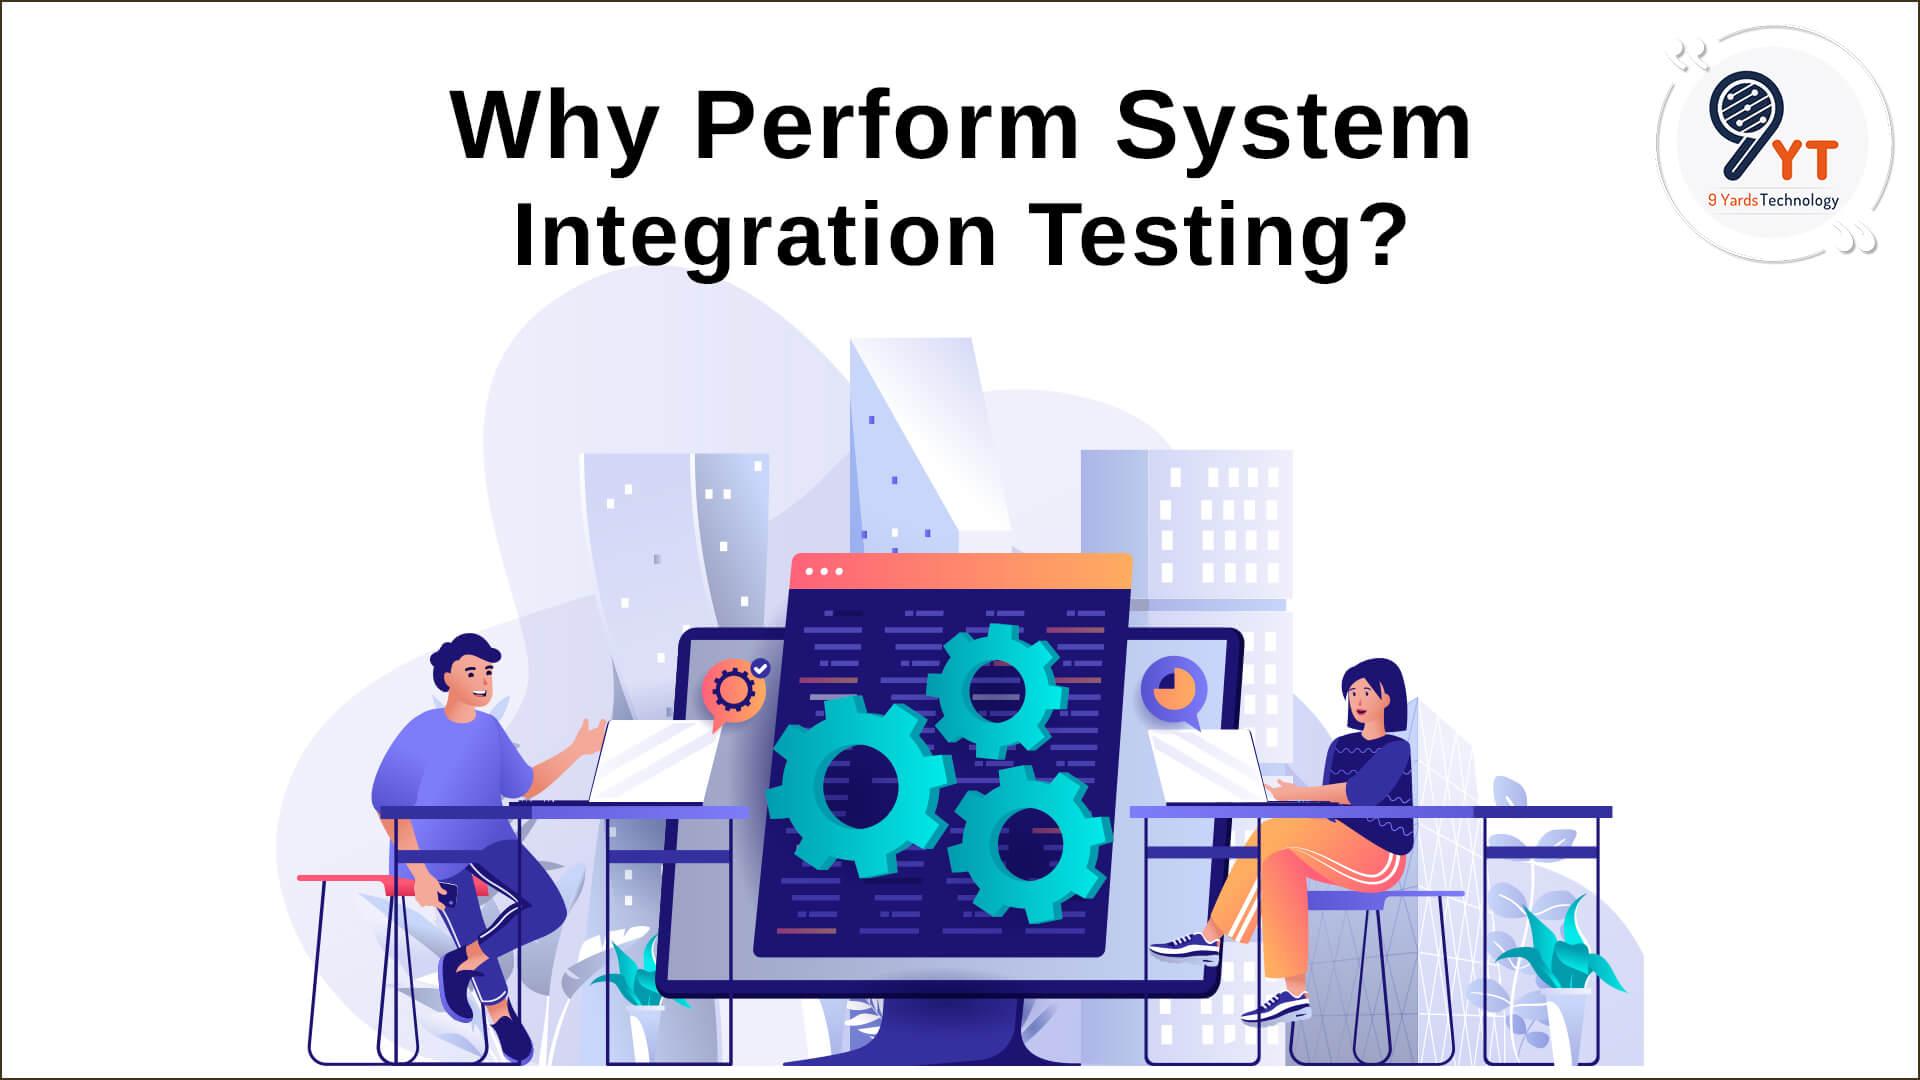 Why Perform System Integration Testing?